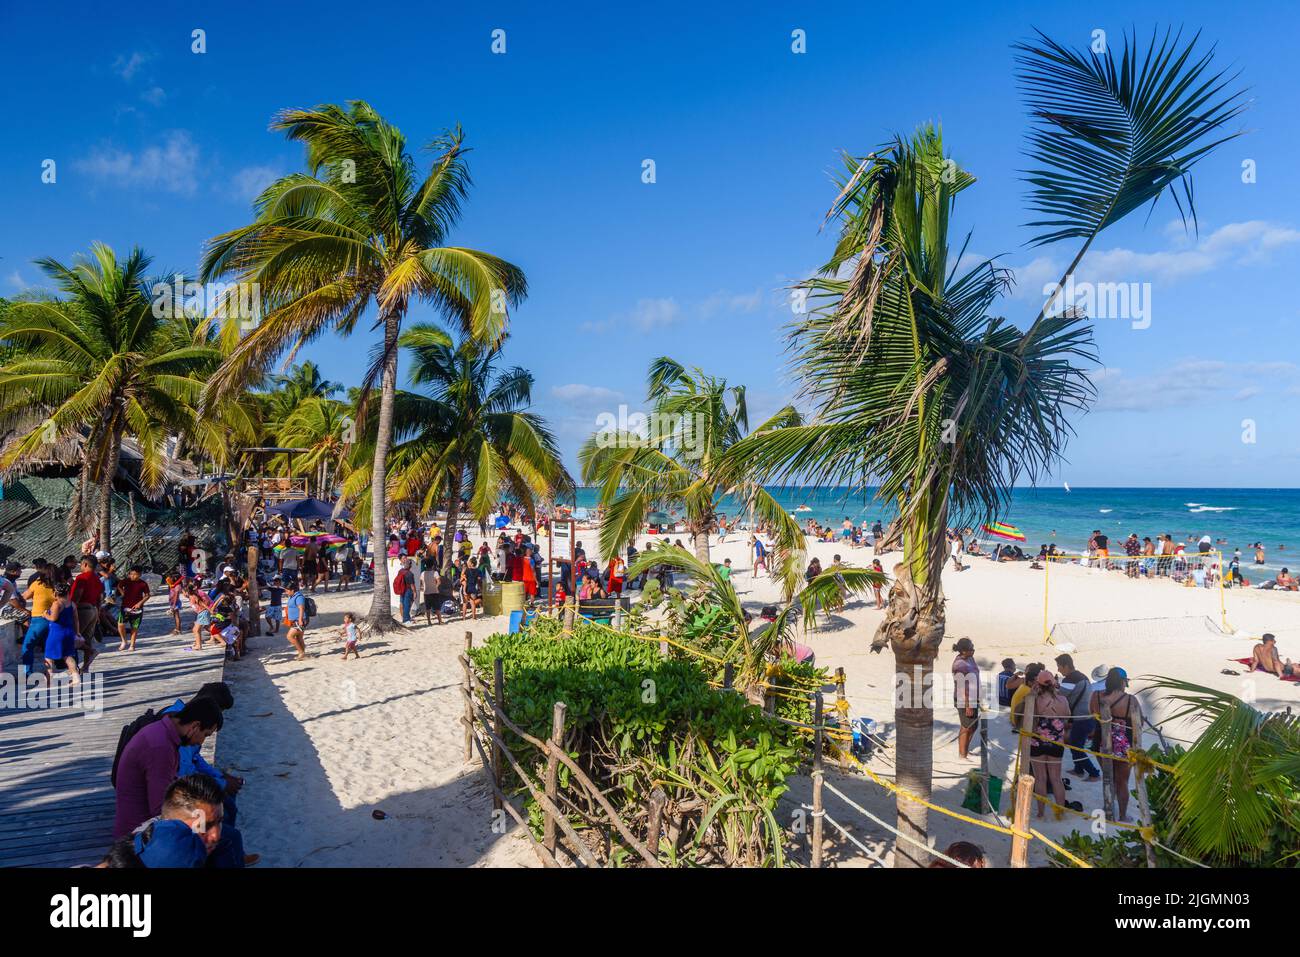 People on the sandy beach with cocos palms in Playa del Carmen, Yukatan, Mexico. Stock Photo